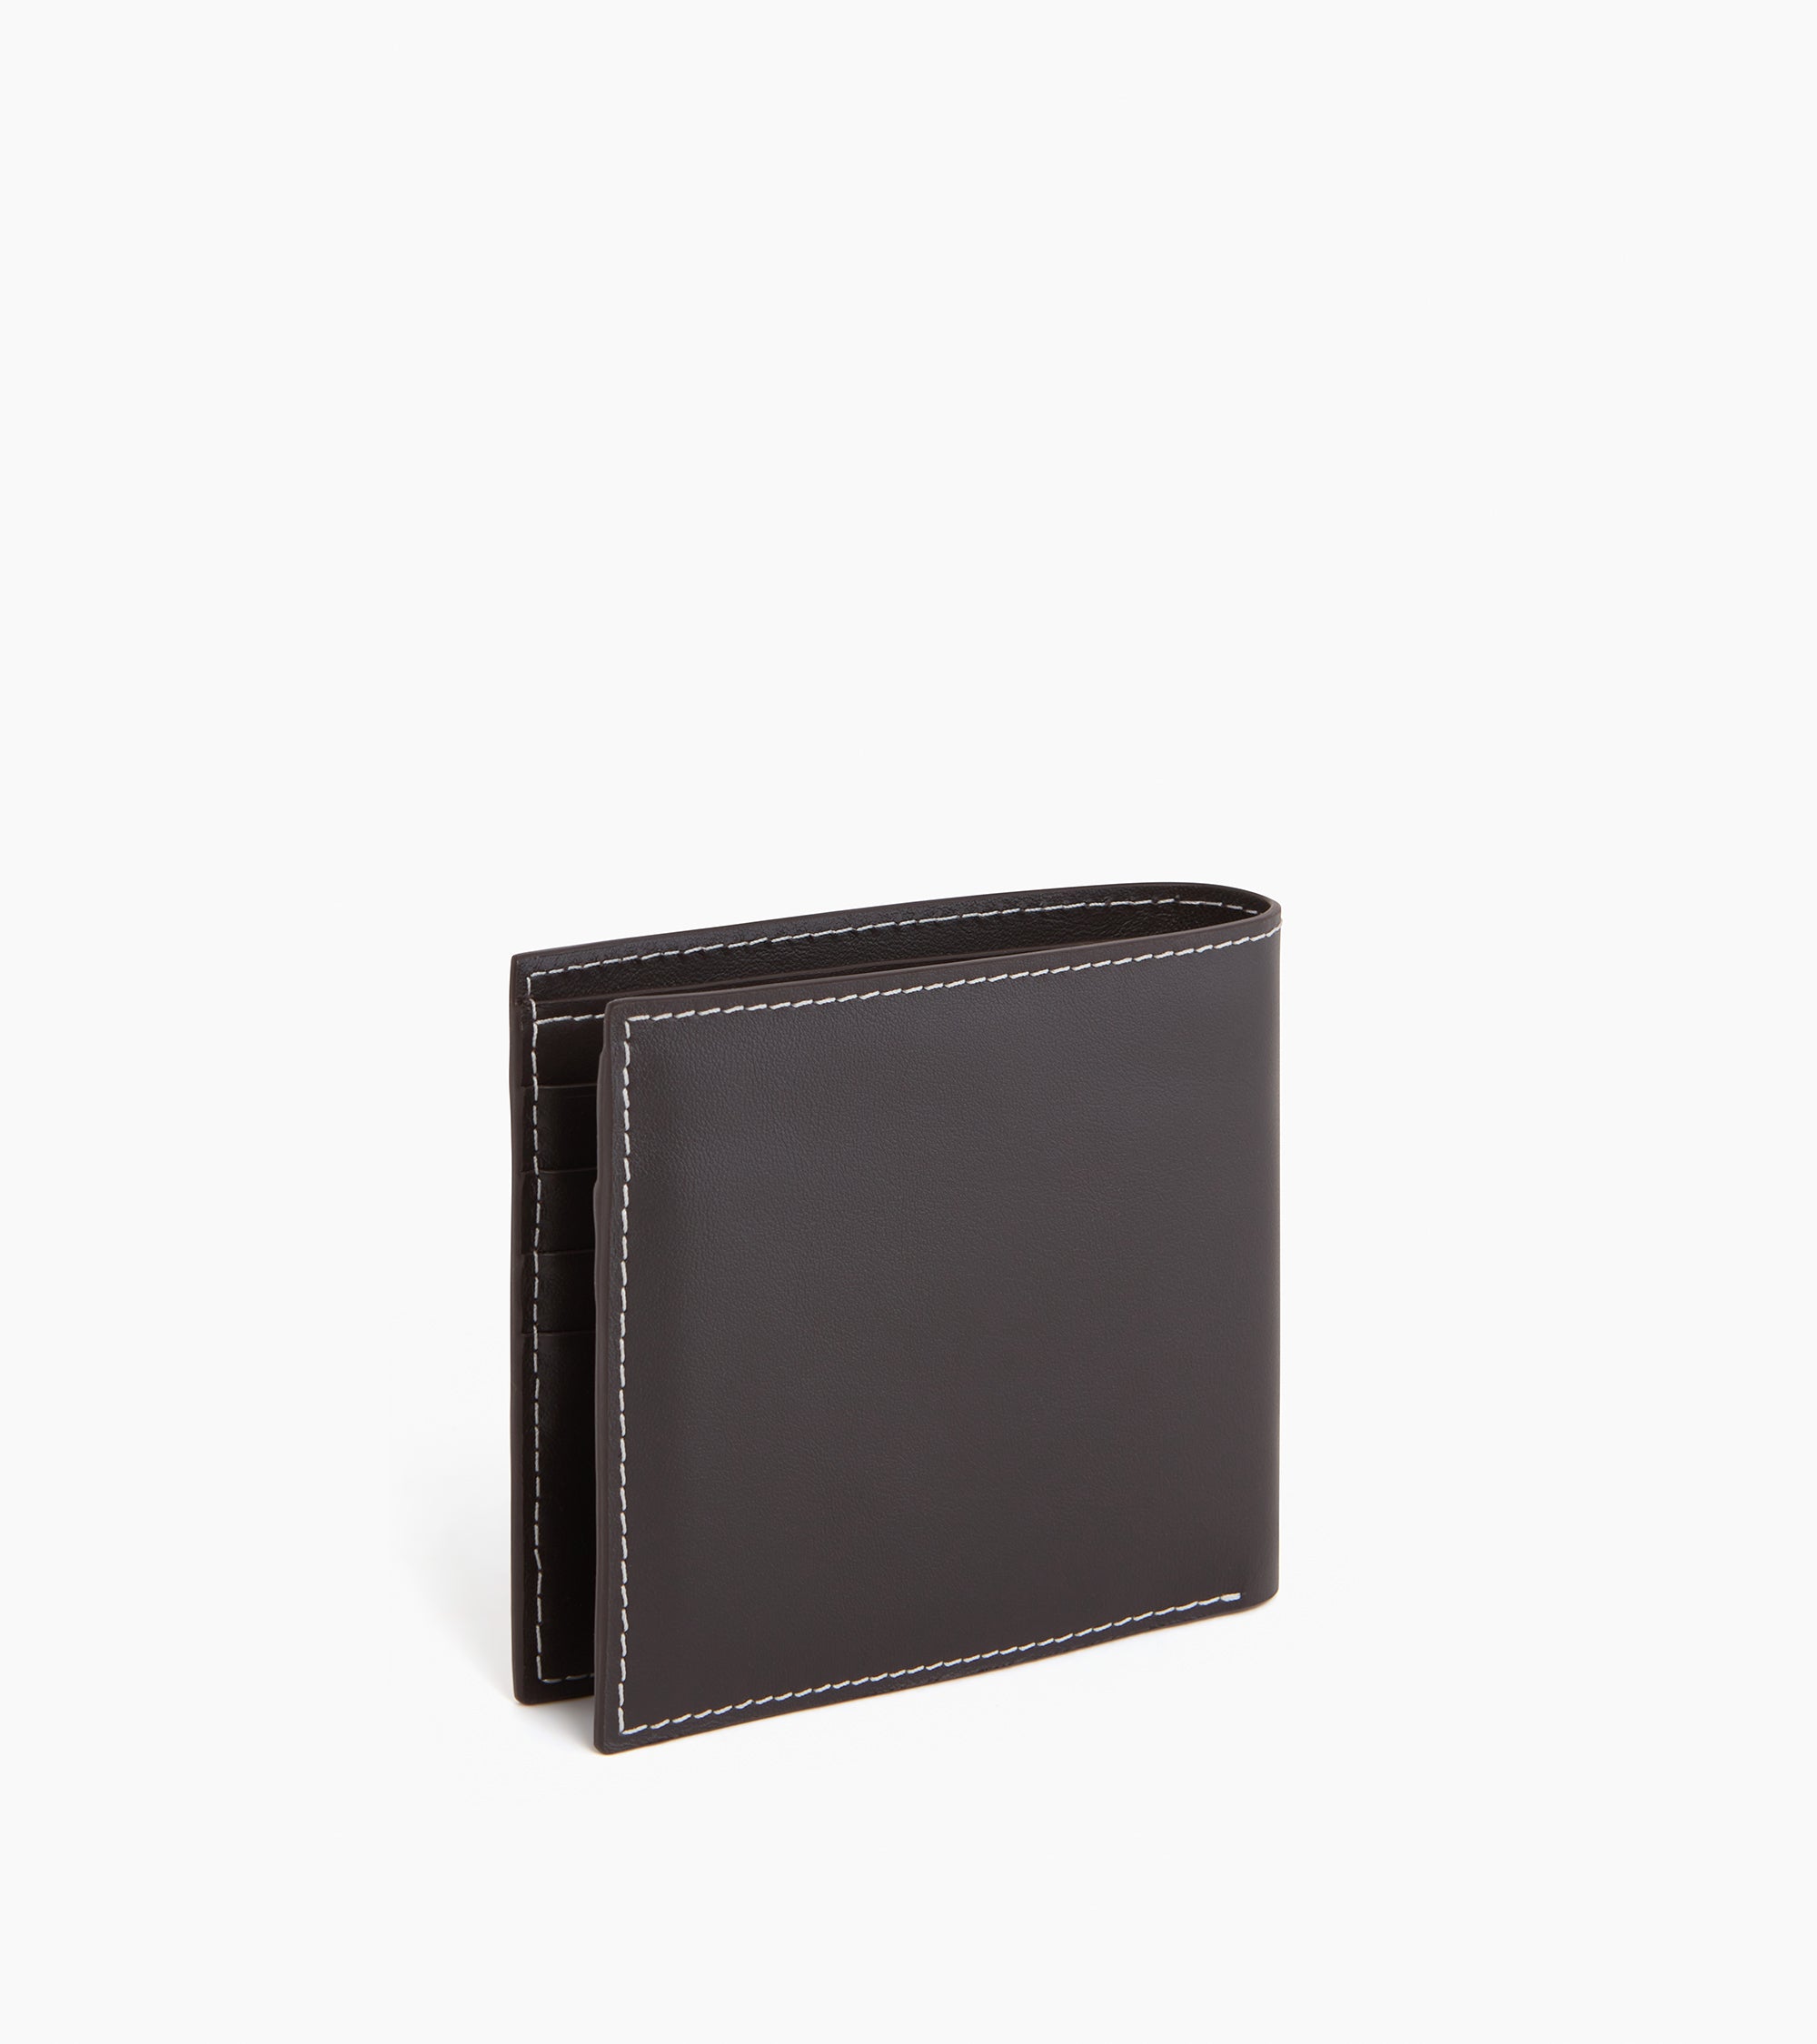 Léon horizontal, zipped wallet in smooth leather